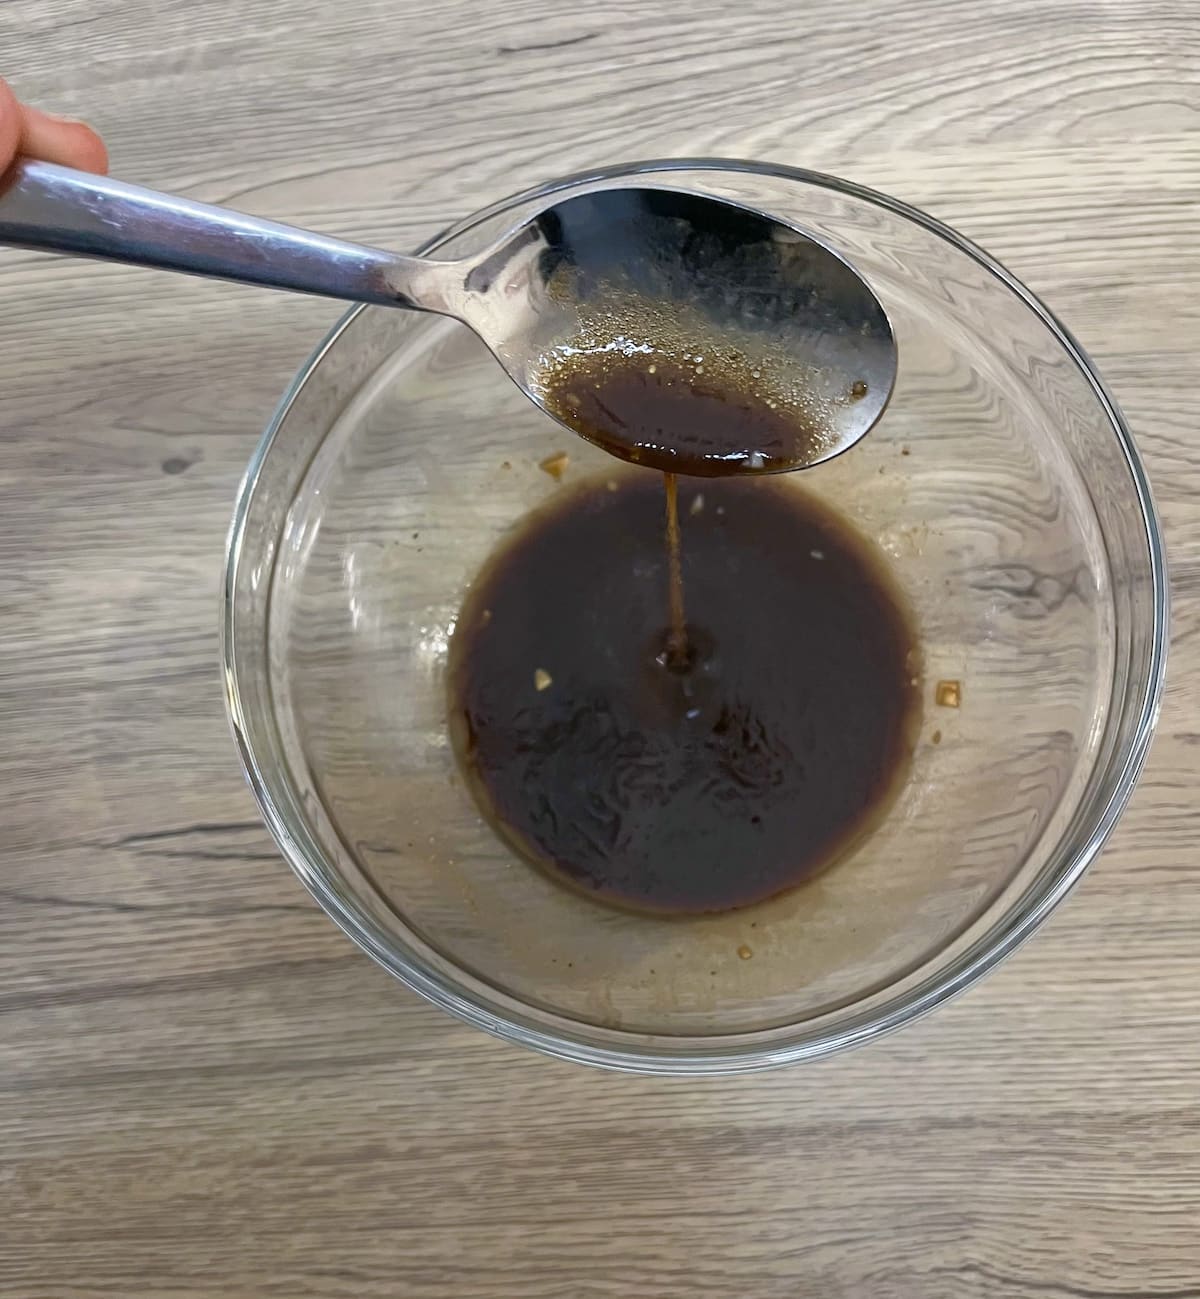 Balsamic Vinaigrette in a bowl with a spoon